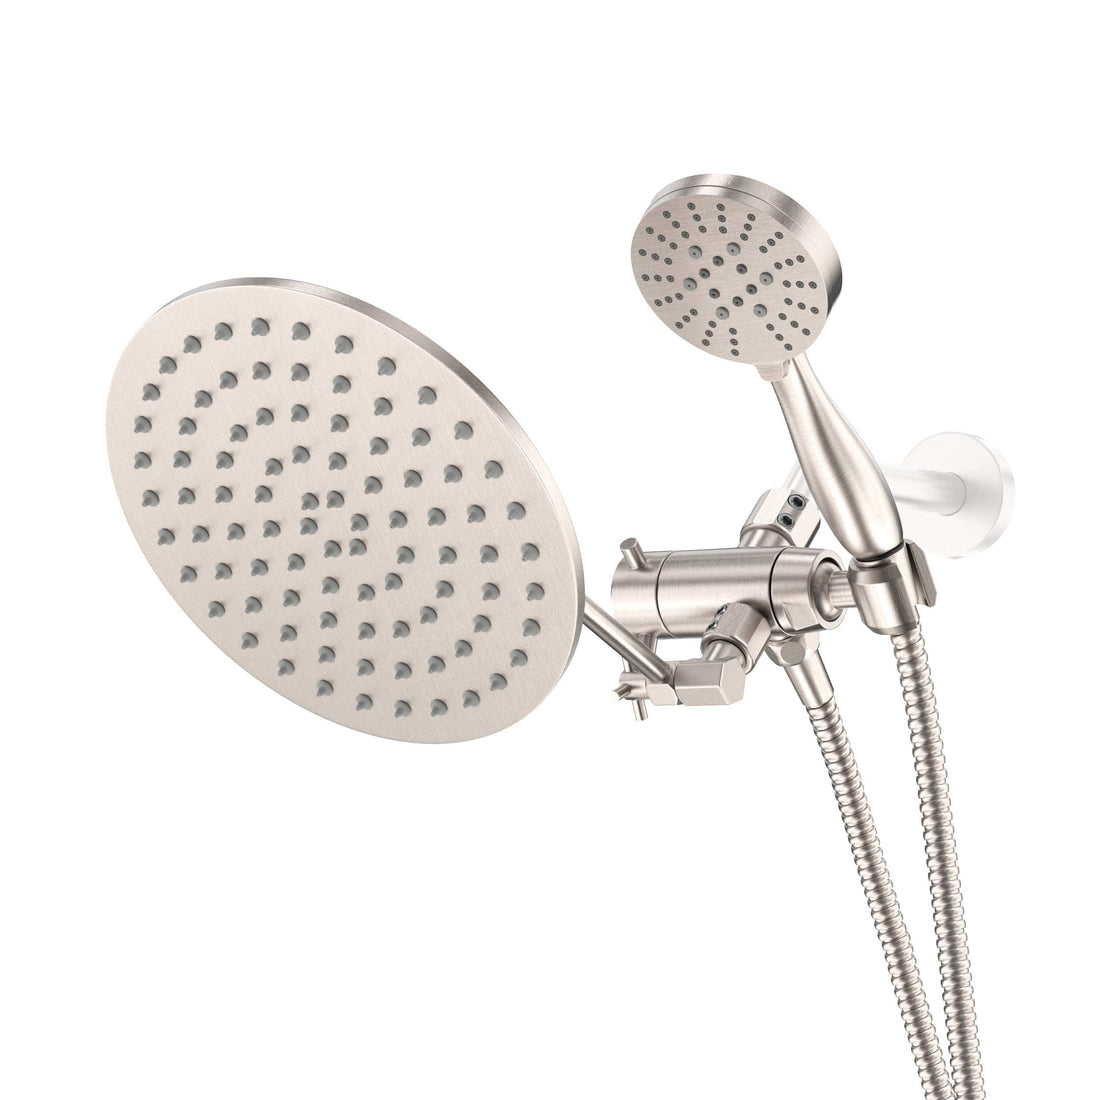 Main Image 3-Spray Dual with Adjustable Arm Brushed Nickel / 2.5 - The Shower Head Store